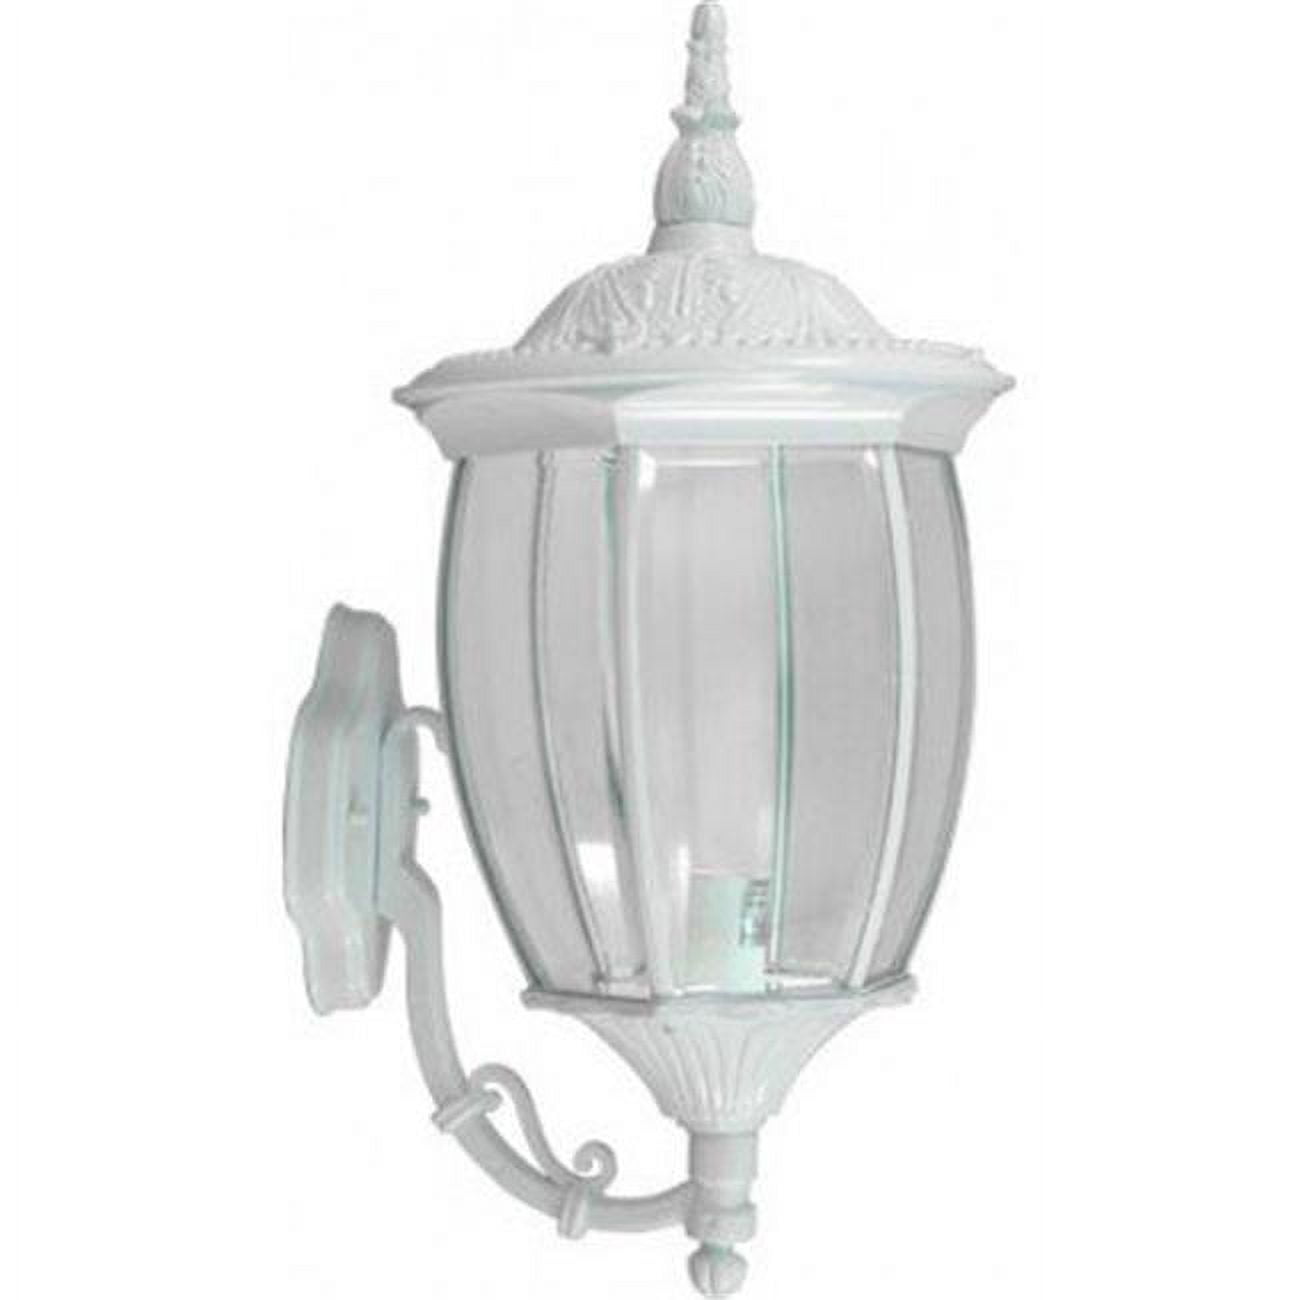 Picture of Dabmar Lighting GM105-LED16-W 16W & 85-265V LED Victoria Wall Light Fixture - White